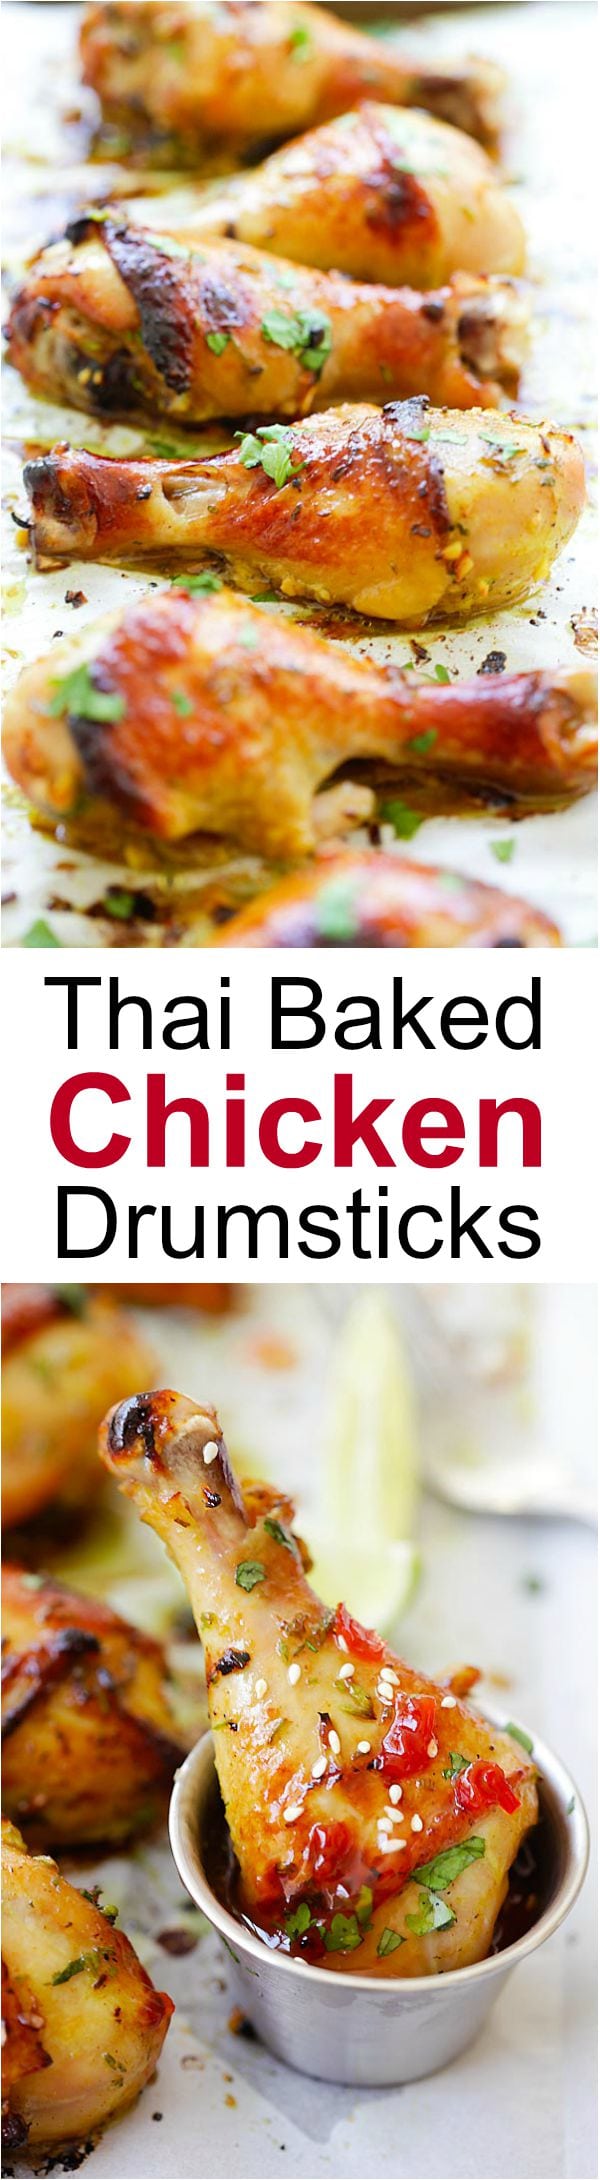 Thai Baked Chicken Drumsticks – juicy, tasty, moist chicken marinated with amazing Thai flavors and baked to golden perfection. So good! | rasamalaysia.com